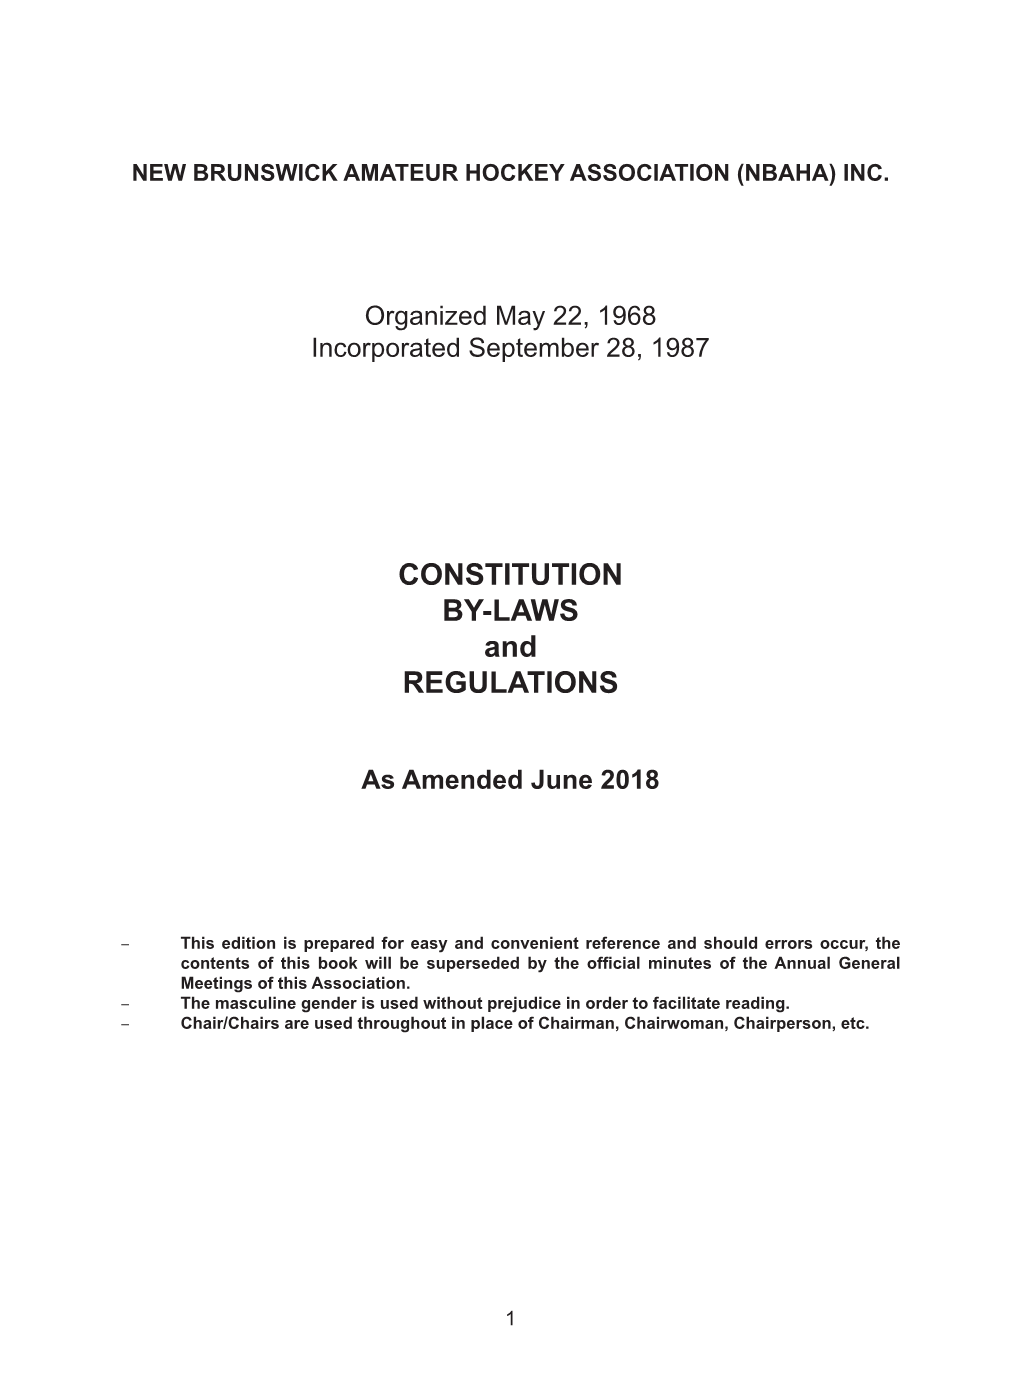 CONSTITUTION BY-LAWS and REGULATIONS